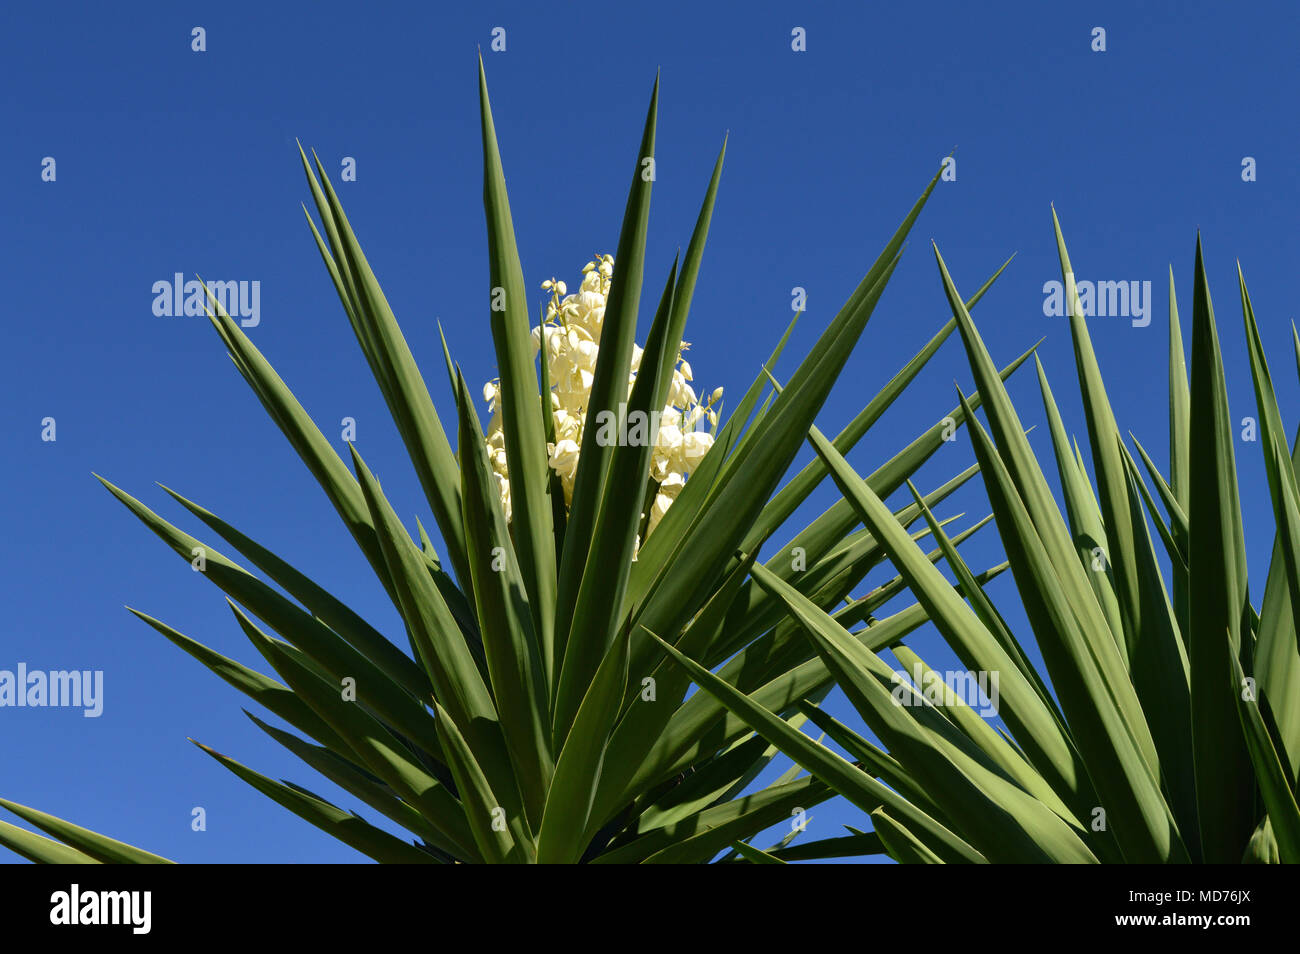 Close-up of a Yucca Plant in Bloom, Nature, Background, Sicily Stock Photo